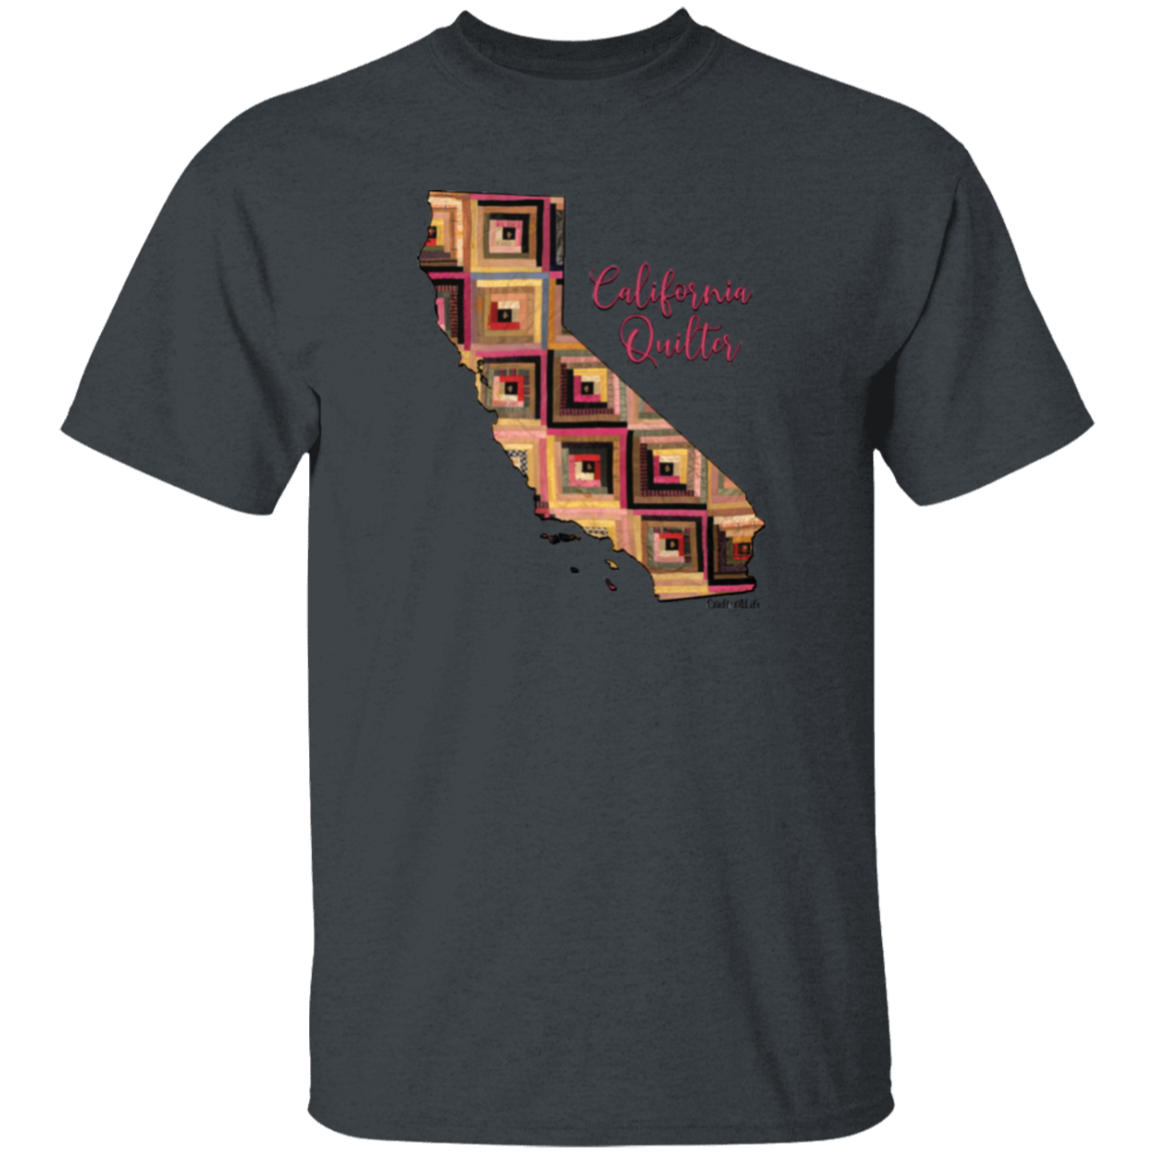 California Quilter T-Shirt, Gift for Quilting Friends and Family